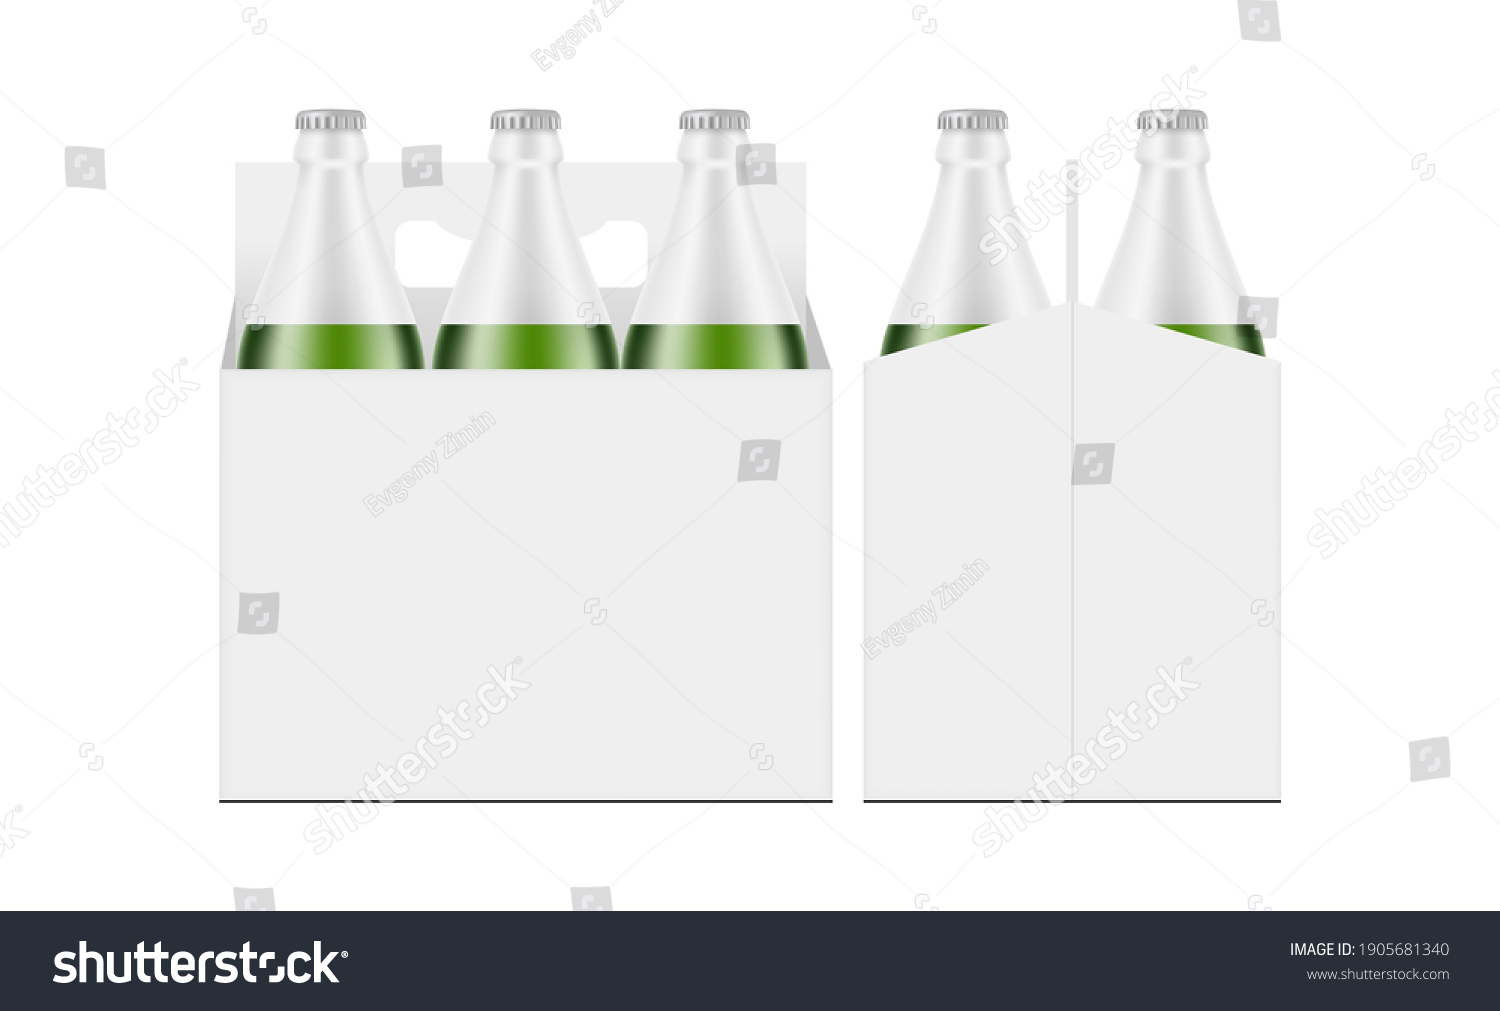 SVG of Six-Pack Green Bottle Carrier Box Mockup, Front and Side View, Isolated on White Background. Vector Illustration svg